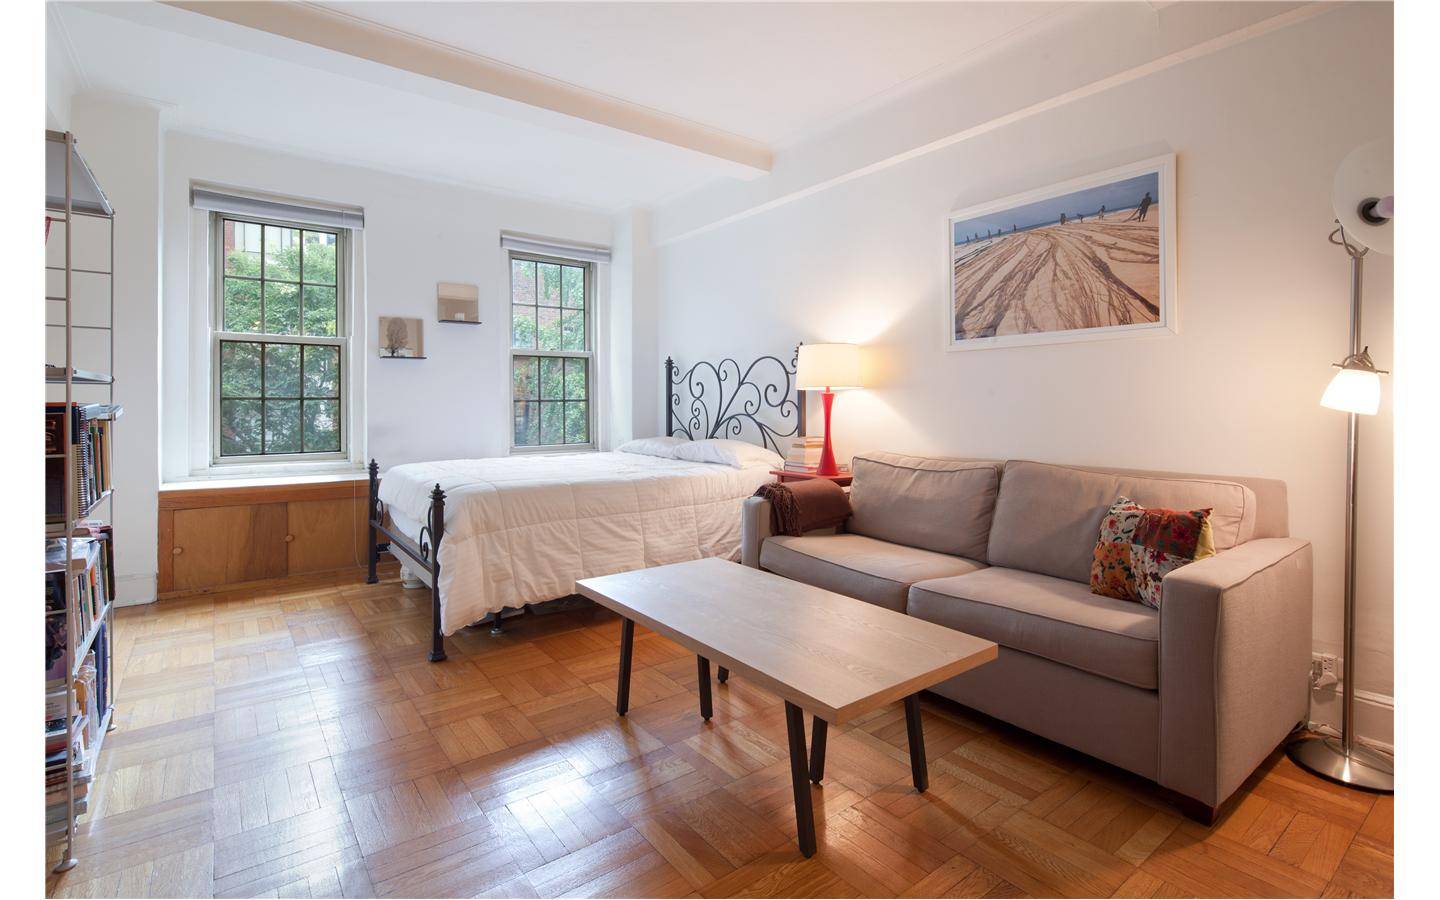 Regal Greenwich Village Studio Apartment with 1 Bath and Fitness Facility